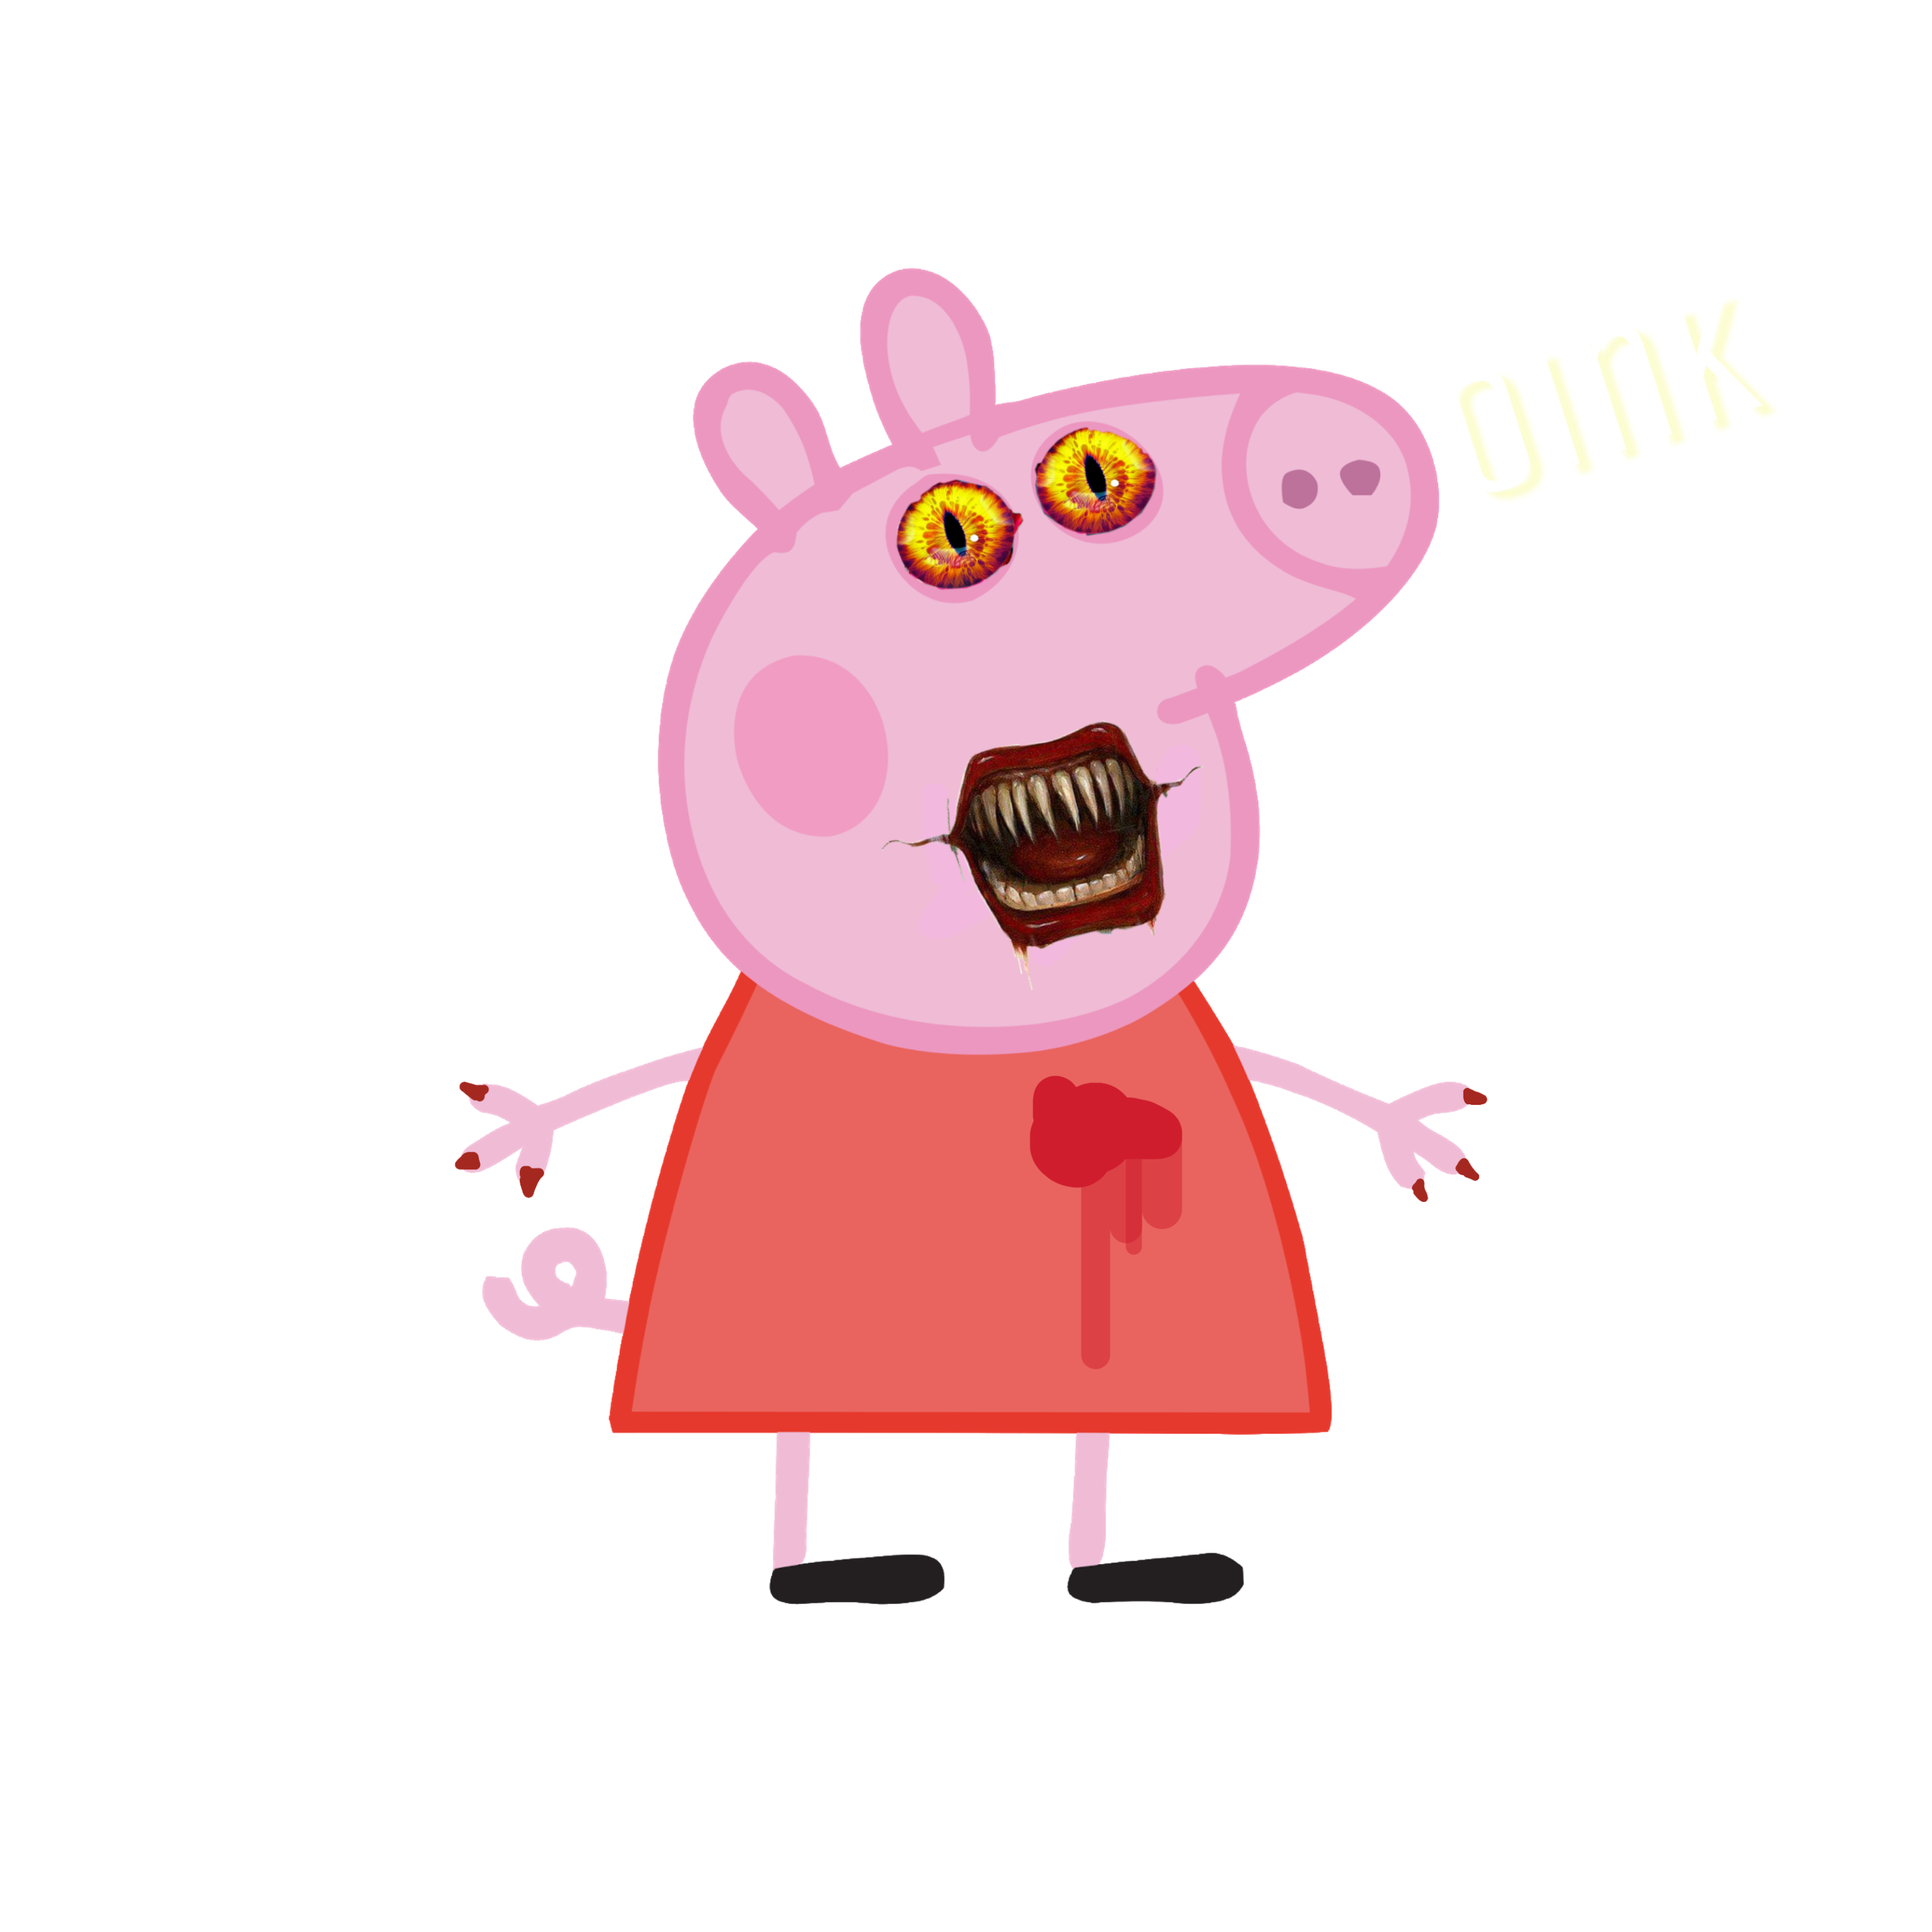 peppapig peppa evil poisonous scary freetoedit...